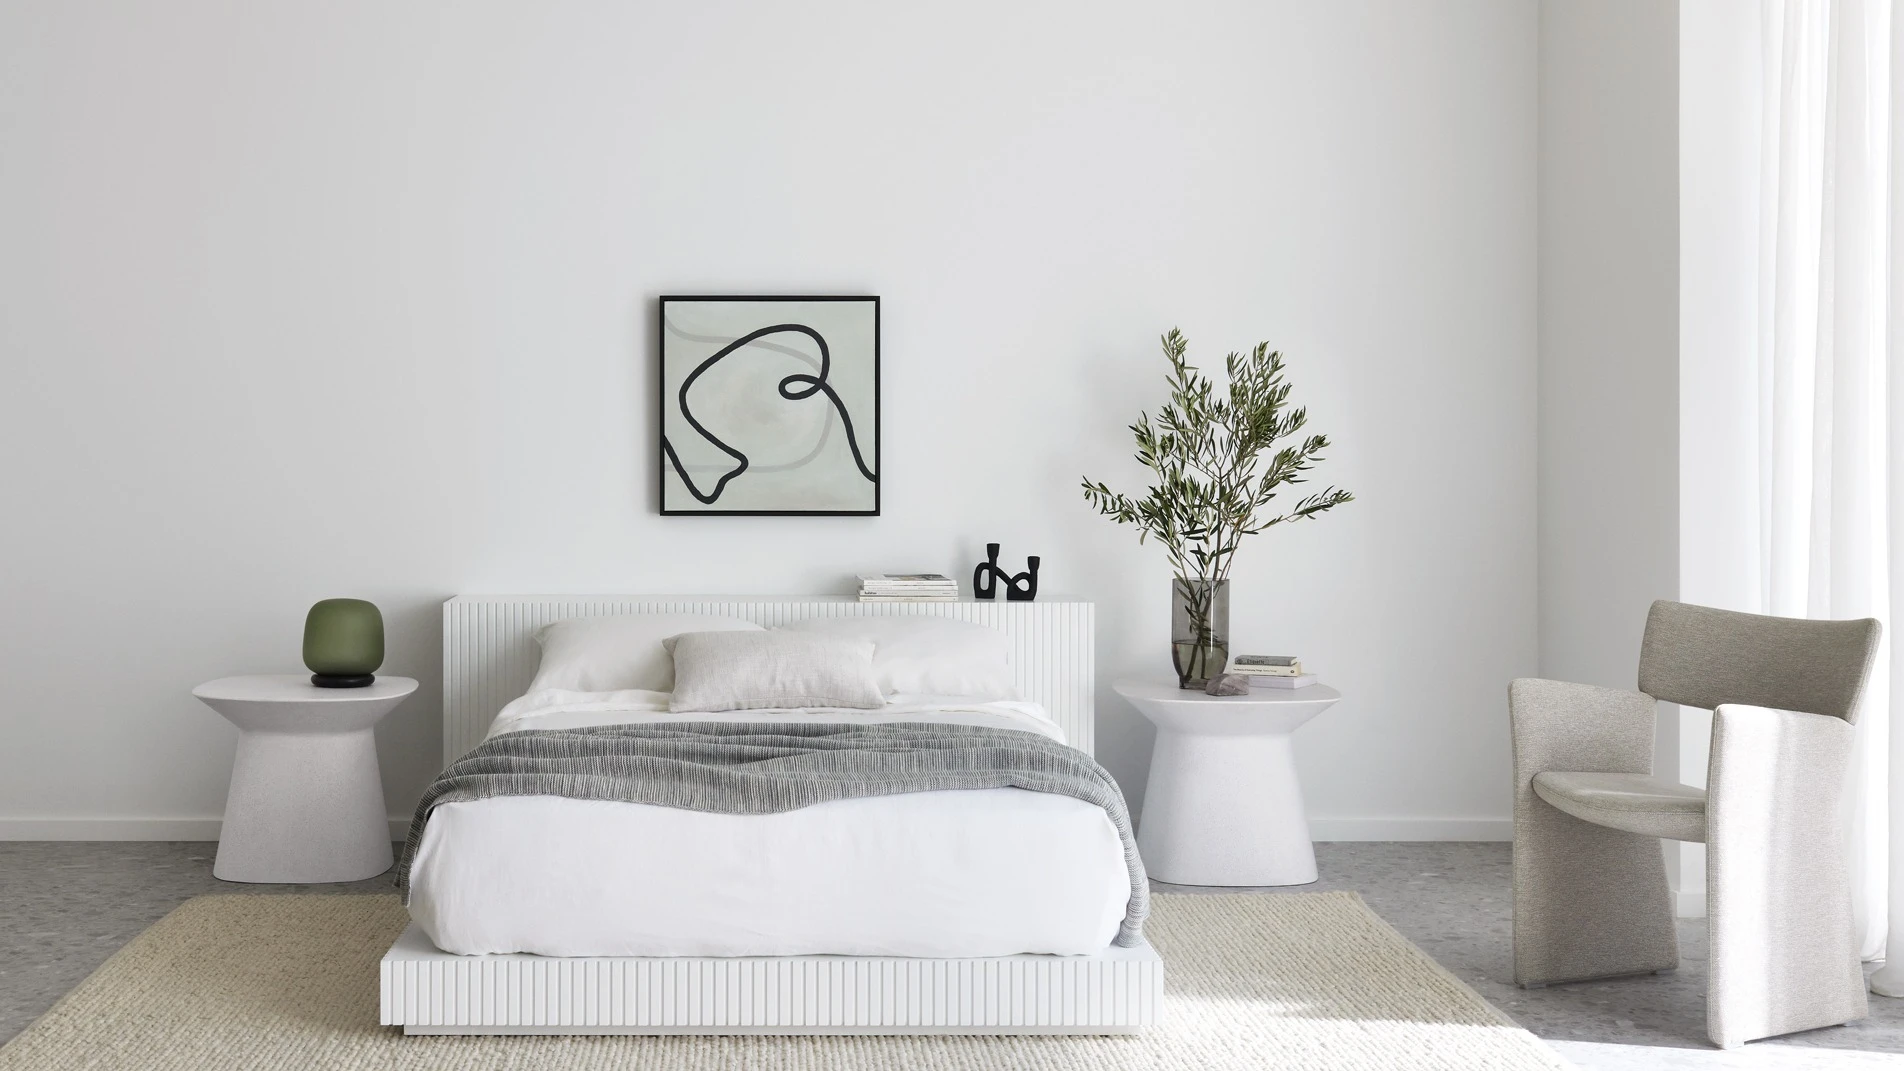 Bed and bedside tables against wall with artwork featured. Small chair beside window. 